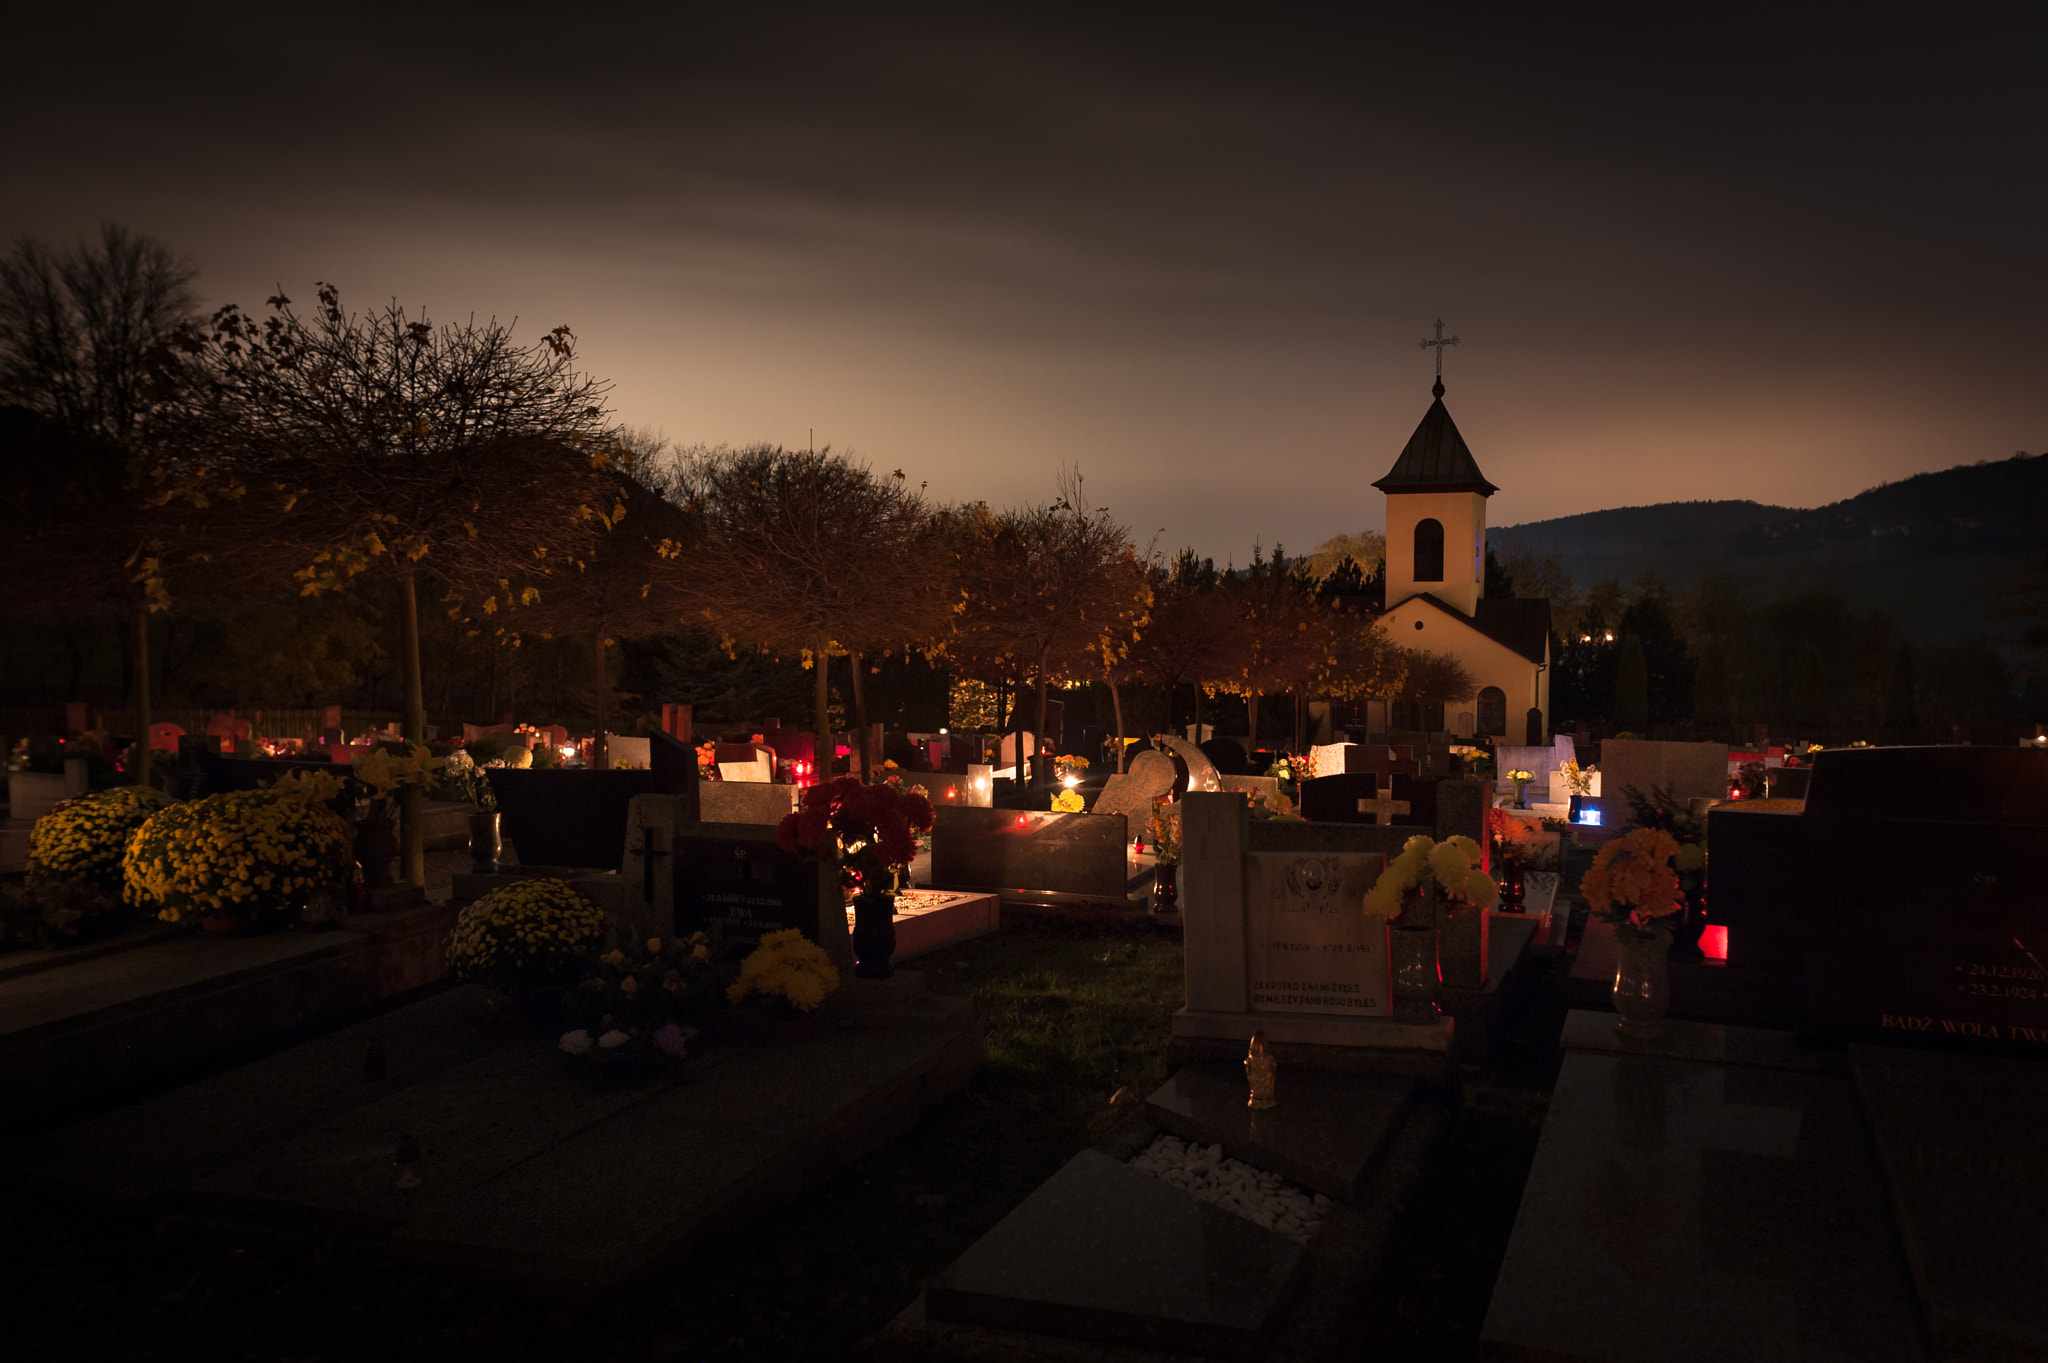 Nikon D700 + Sigma 24mm F1.8 EX DG Aspherical Macro sample photo. Decaesed holiday at night cemetery photography